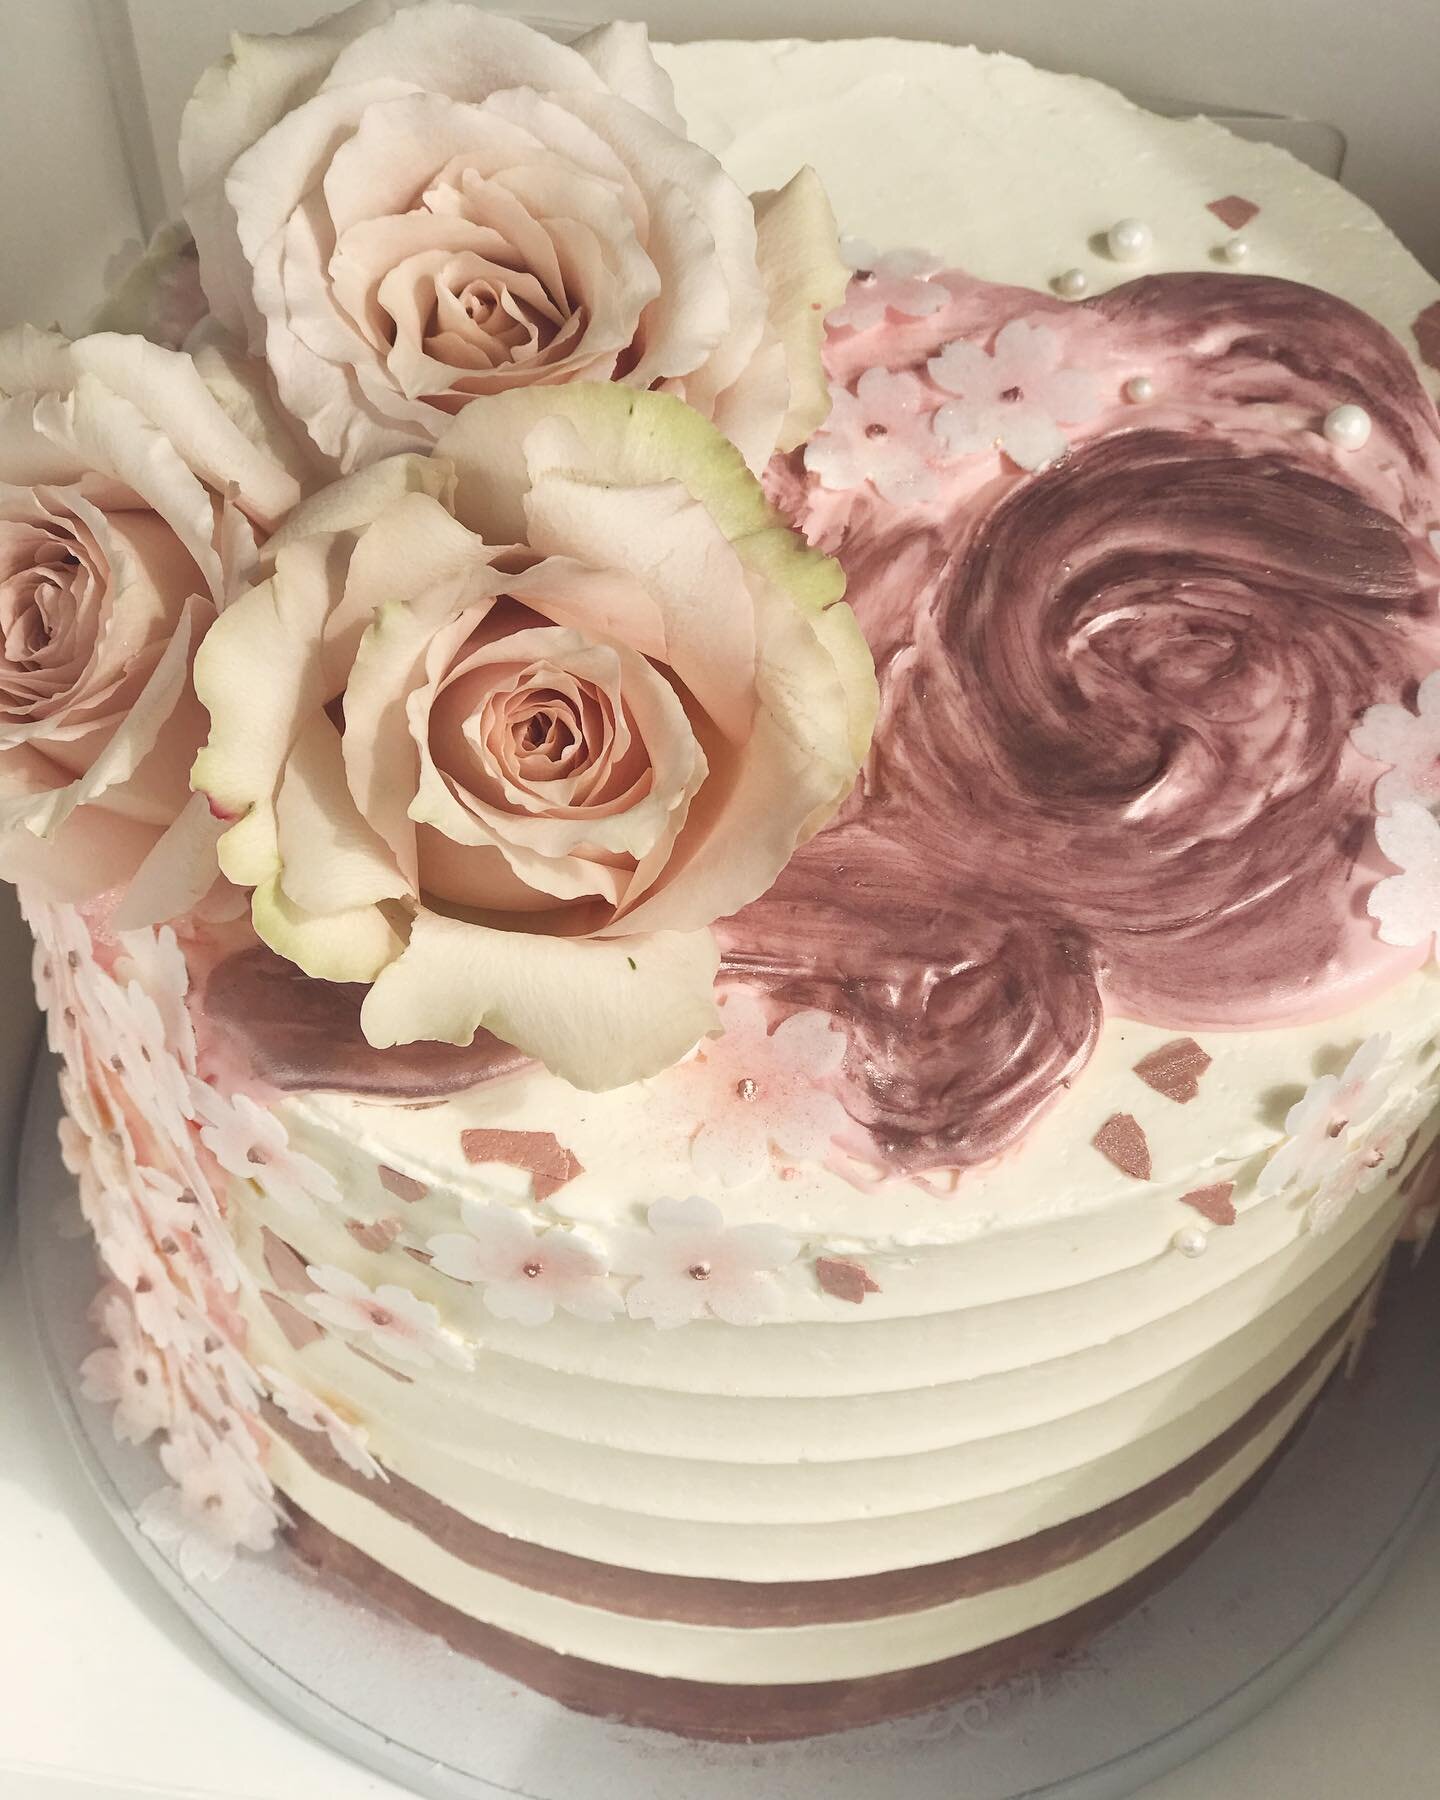 Rose gold finished, vanilla bean cake, filled with fresh raspberry filling.

May your 60th be a happy one. 🌸